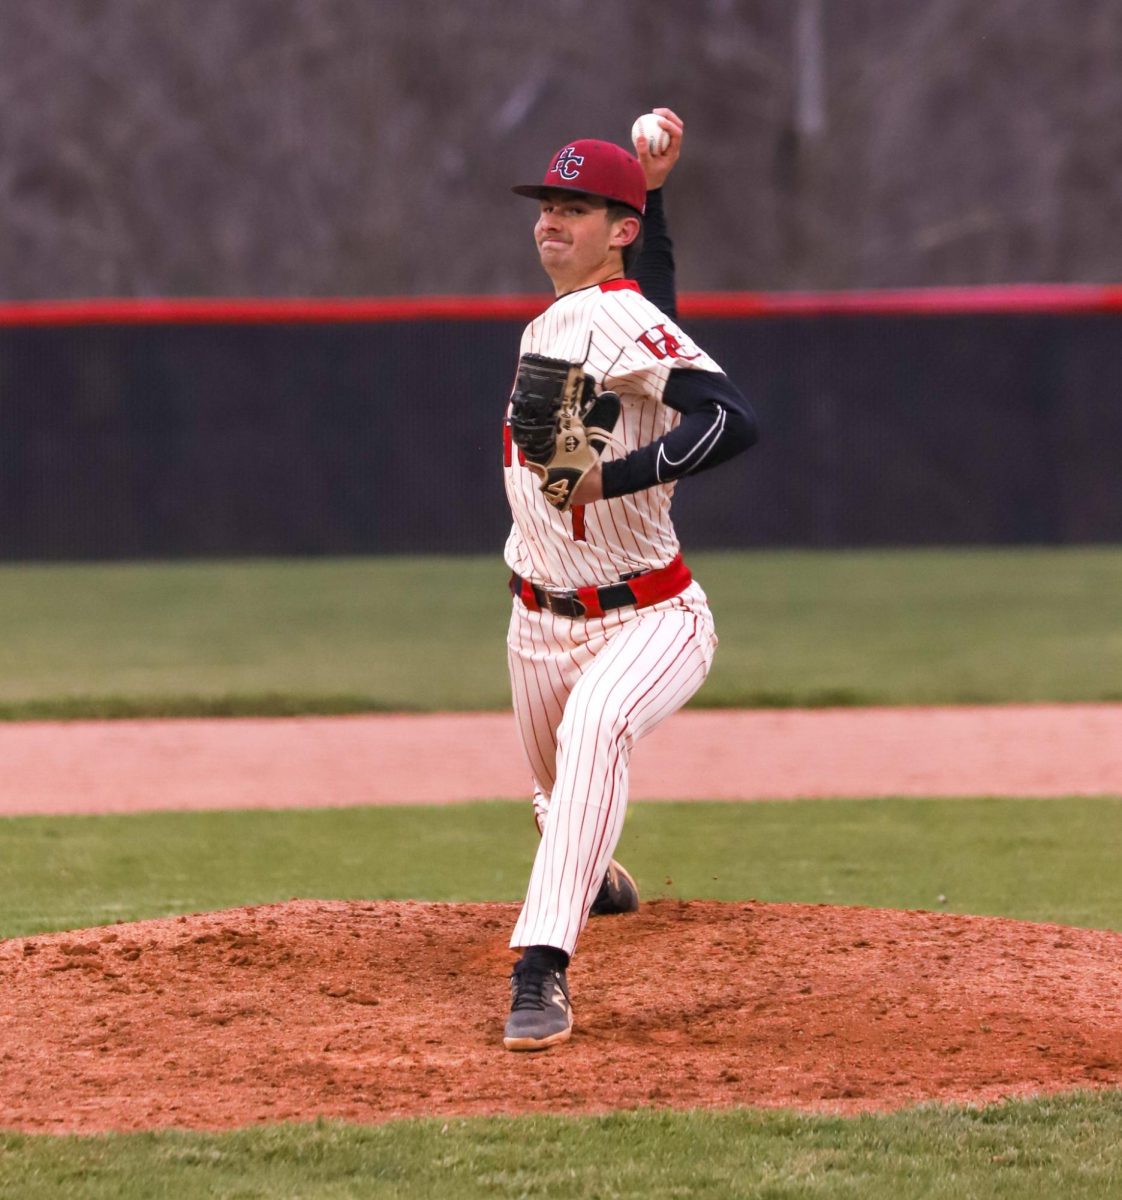 Harlan+County+junior+Alex+Creech+gave+up+only+one+hit+over+five+shutout+innings+as+the+Bears+coasted+to+a+7-1+win+Thursday+over+previously+unbeaten+Shelby+Valley.